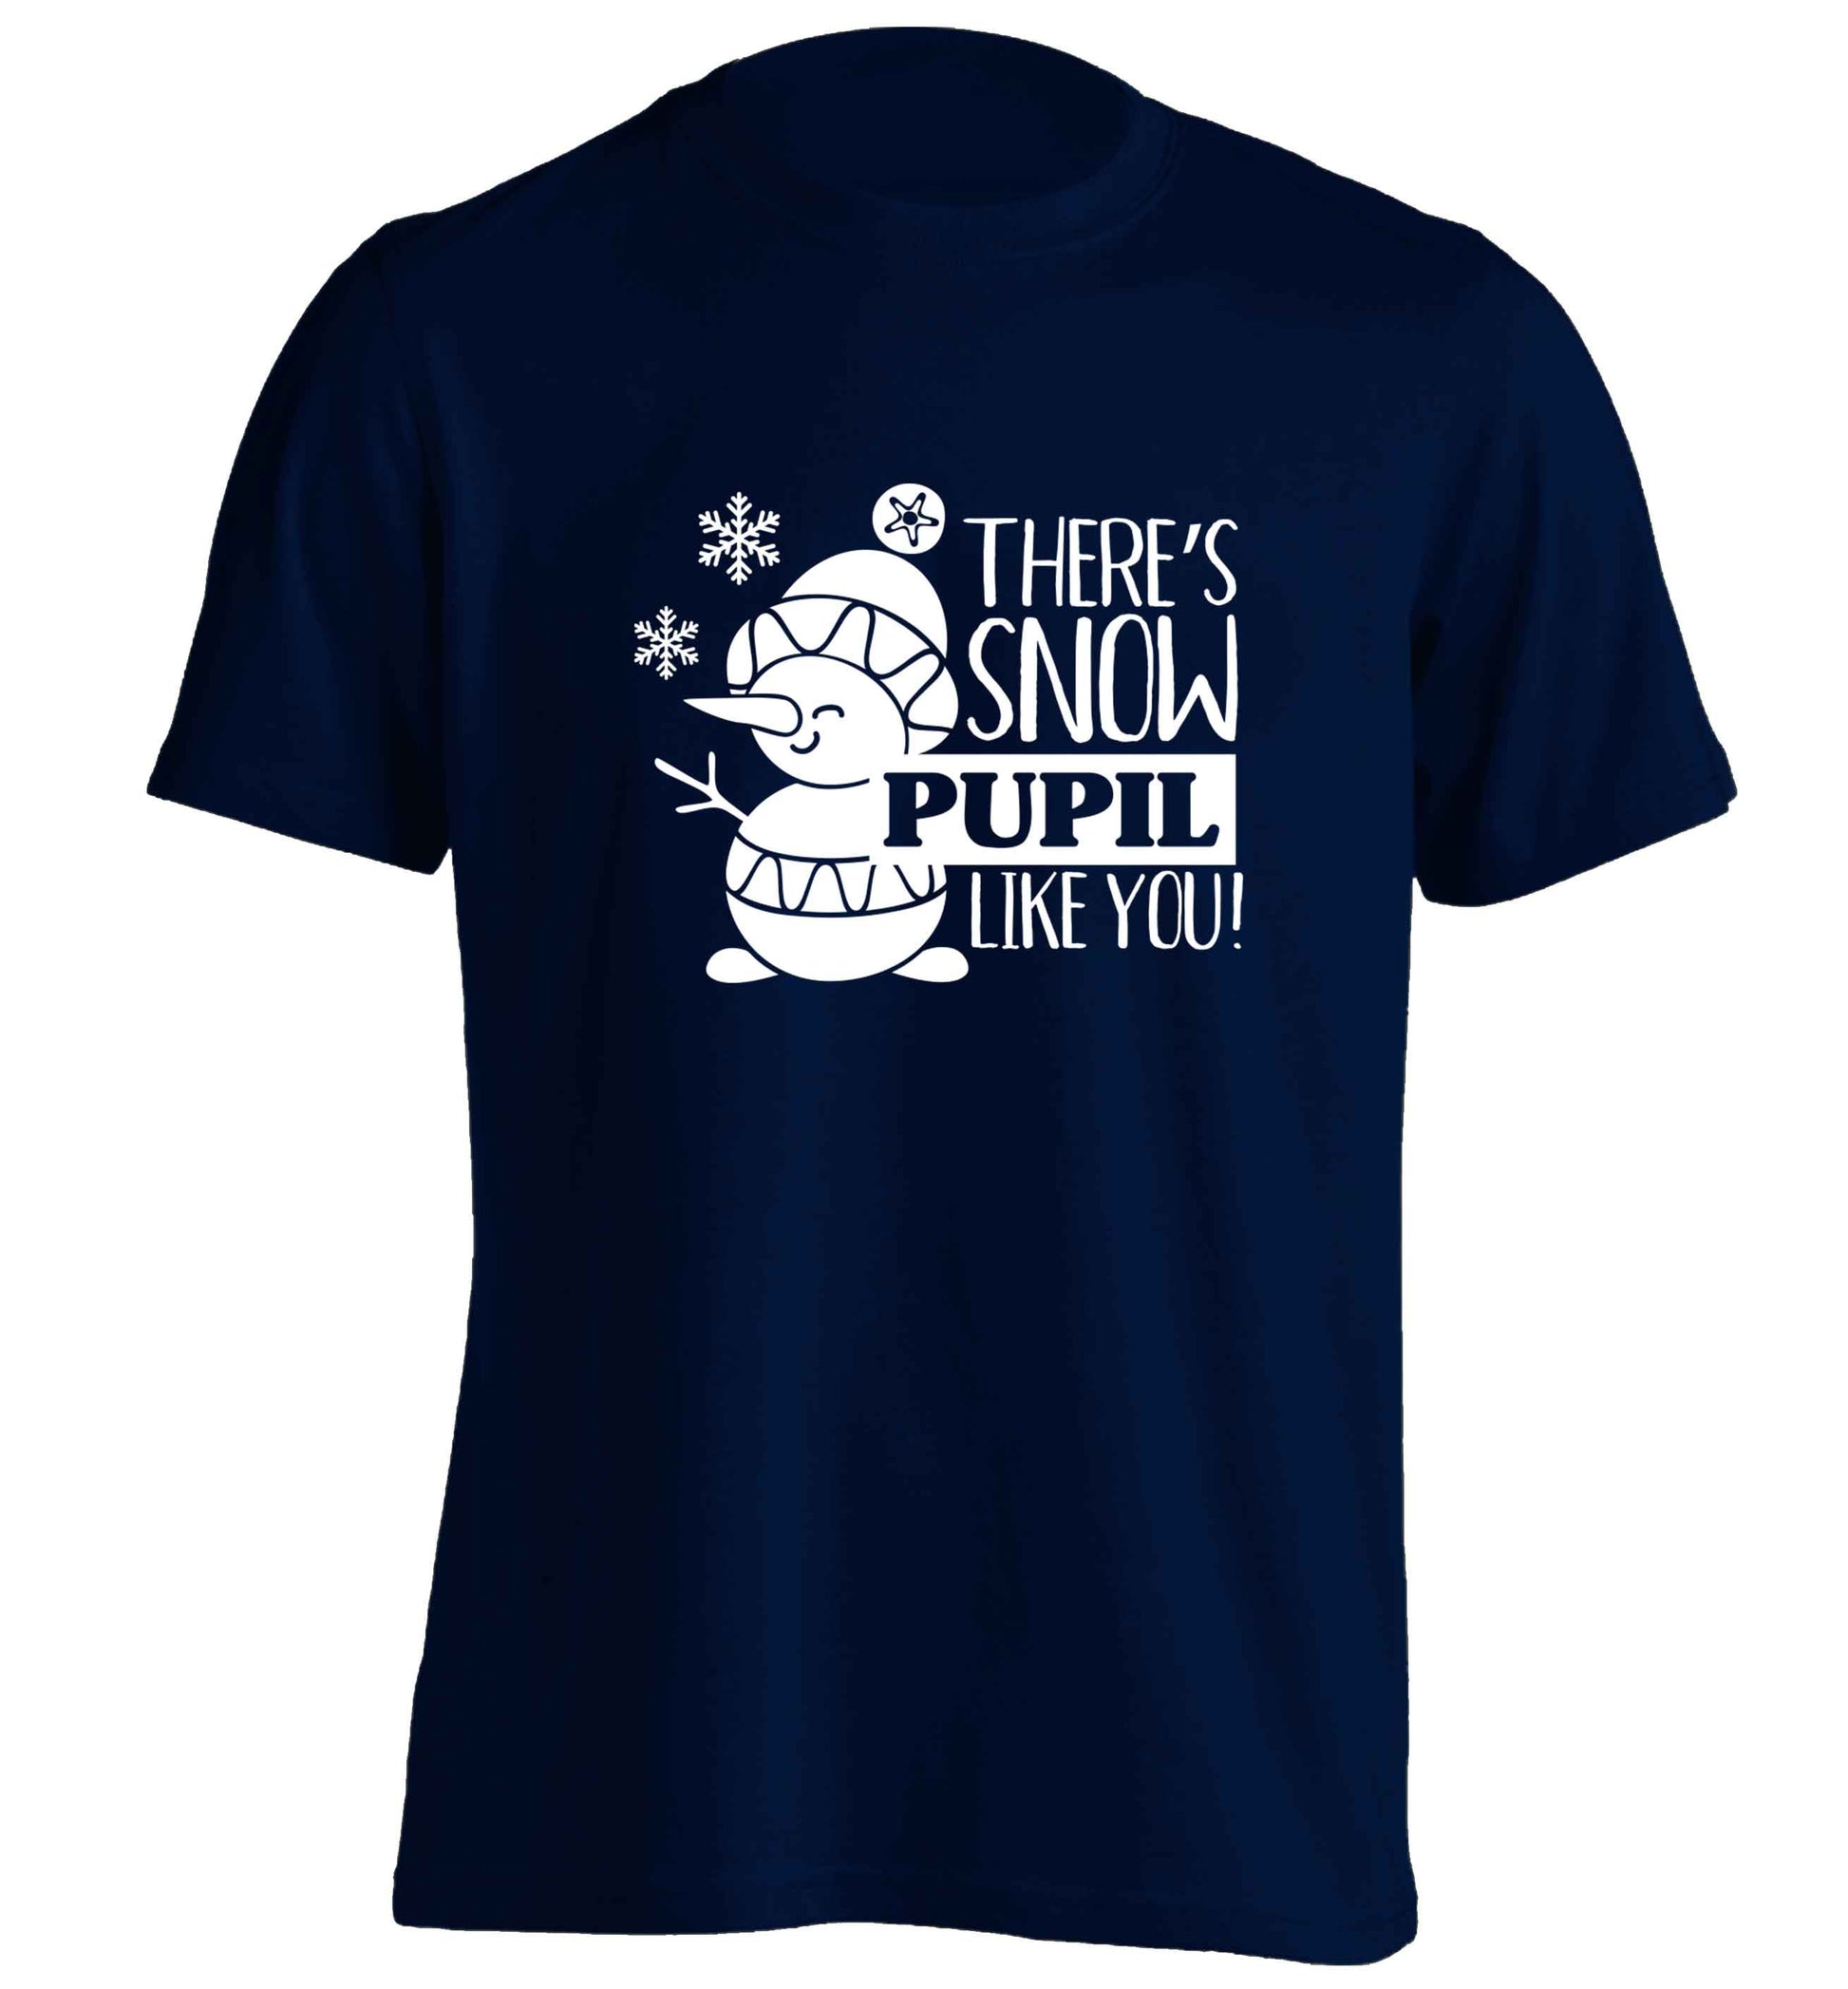 There's snow pupil like you adults unisex navy Tshirt 2XL